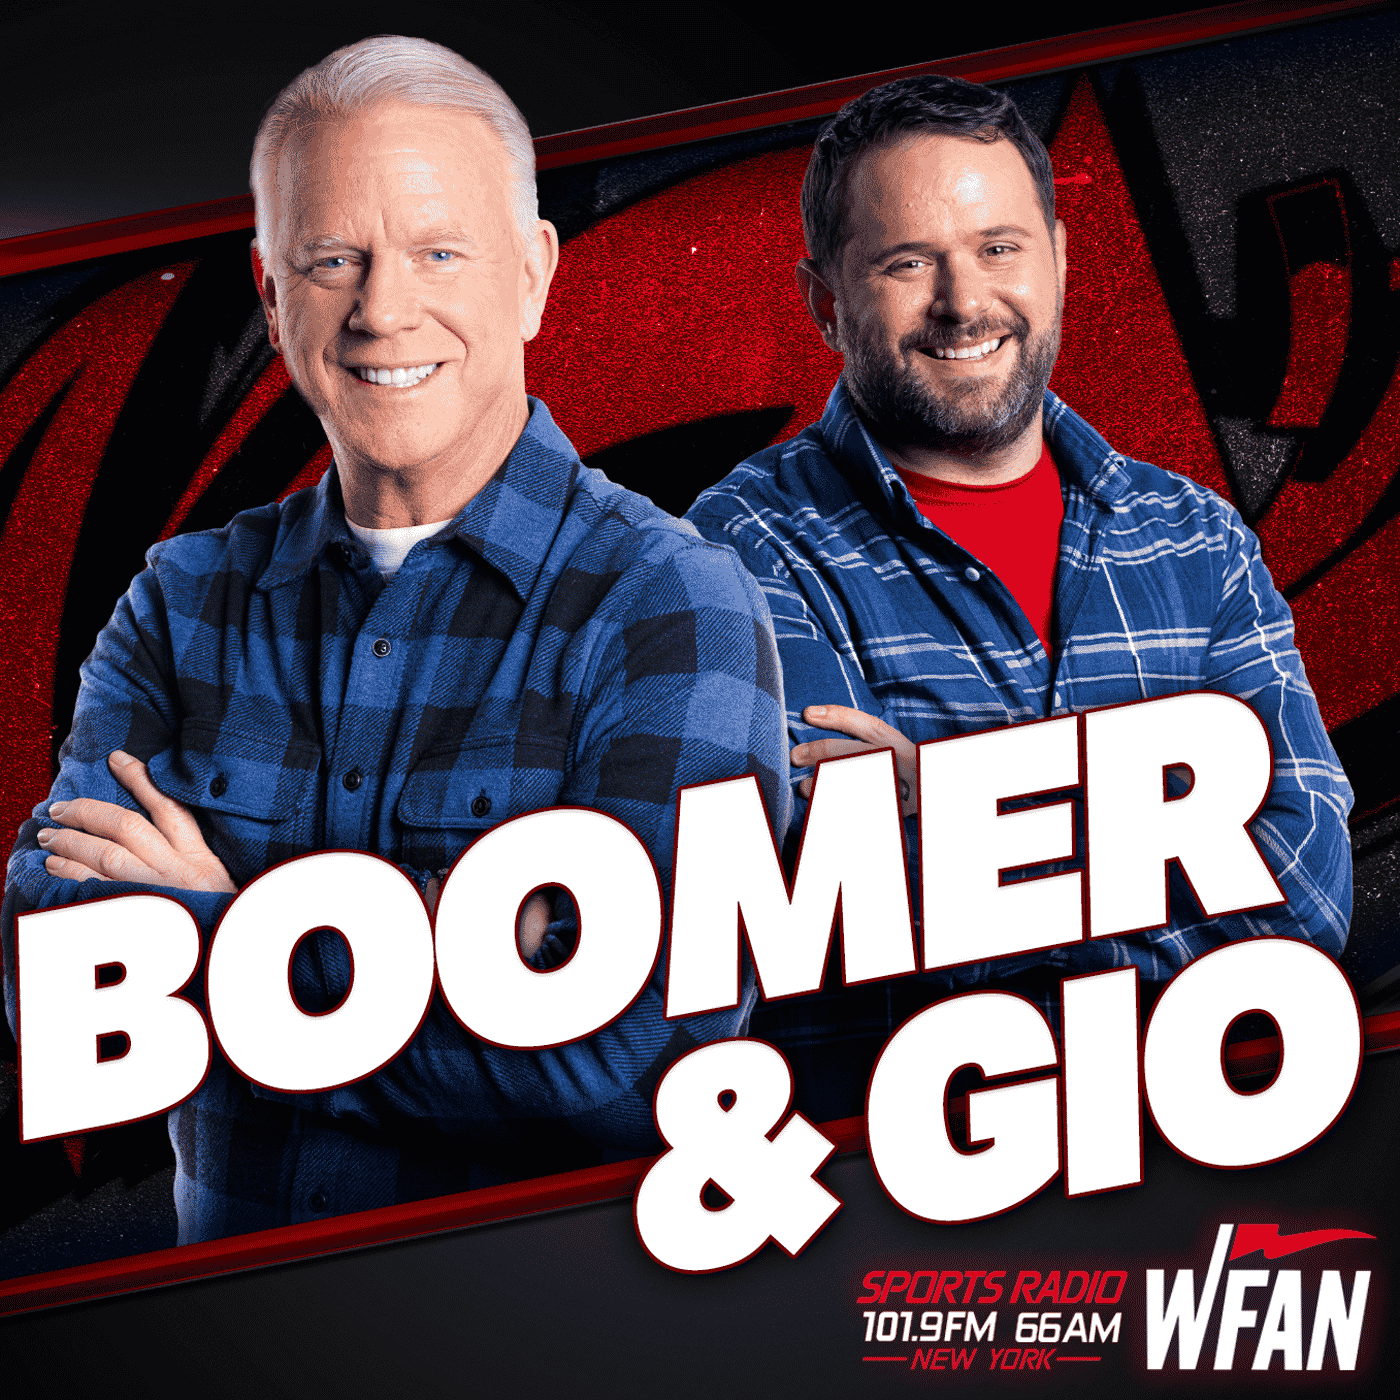 Gio’s impassioned mental health comments while blasting WFAN caller